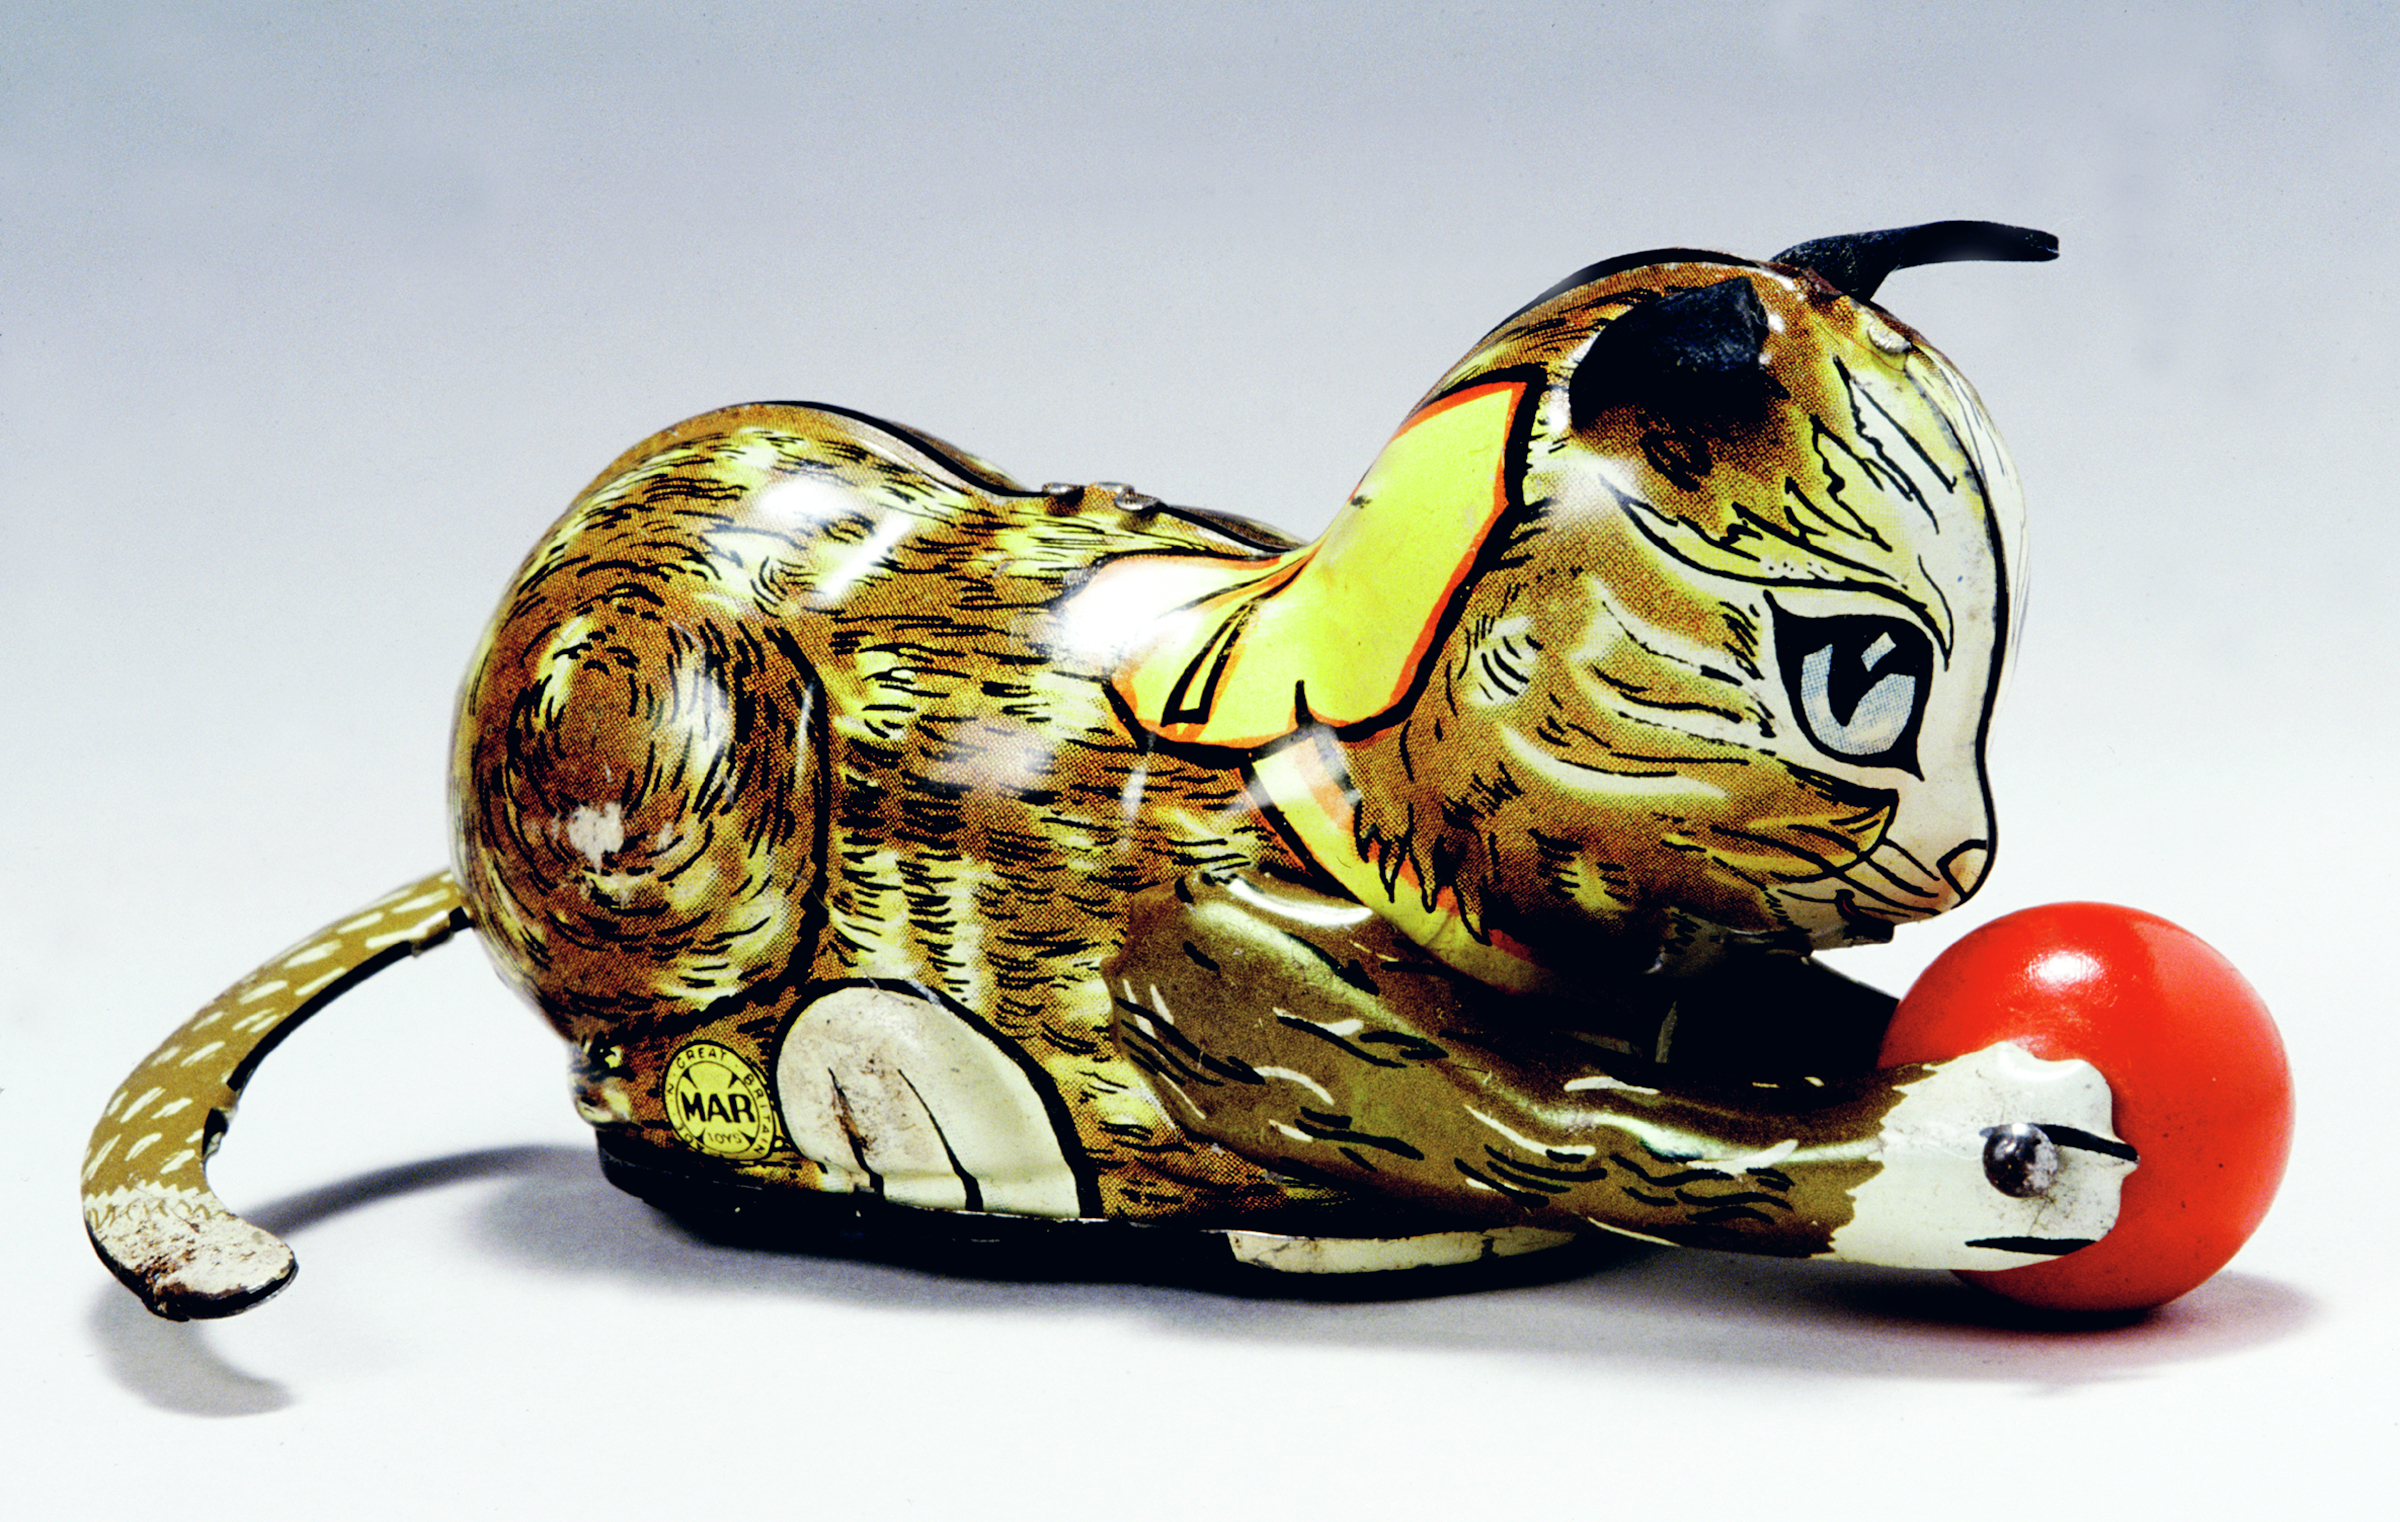 Marx Toys "Roll Over" cat